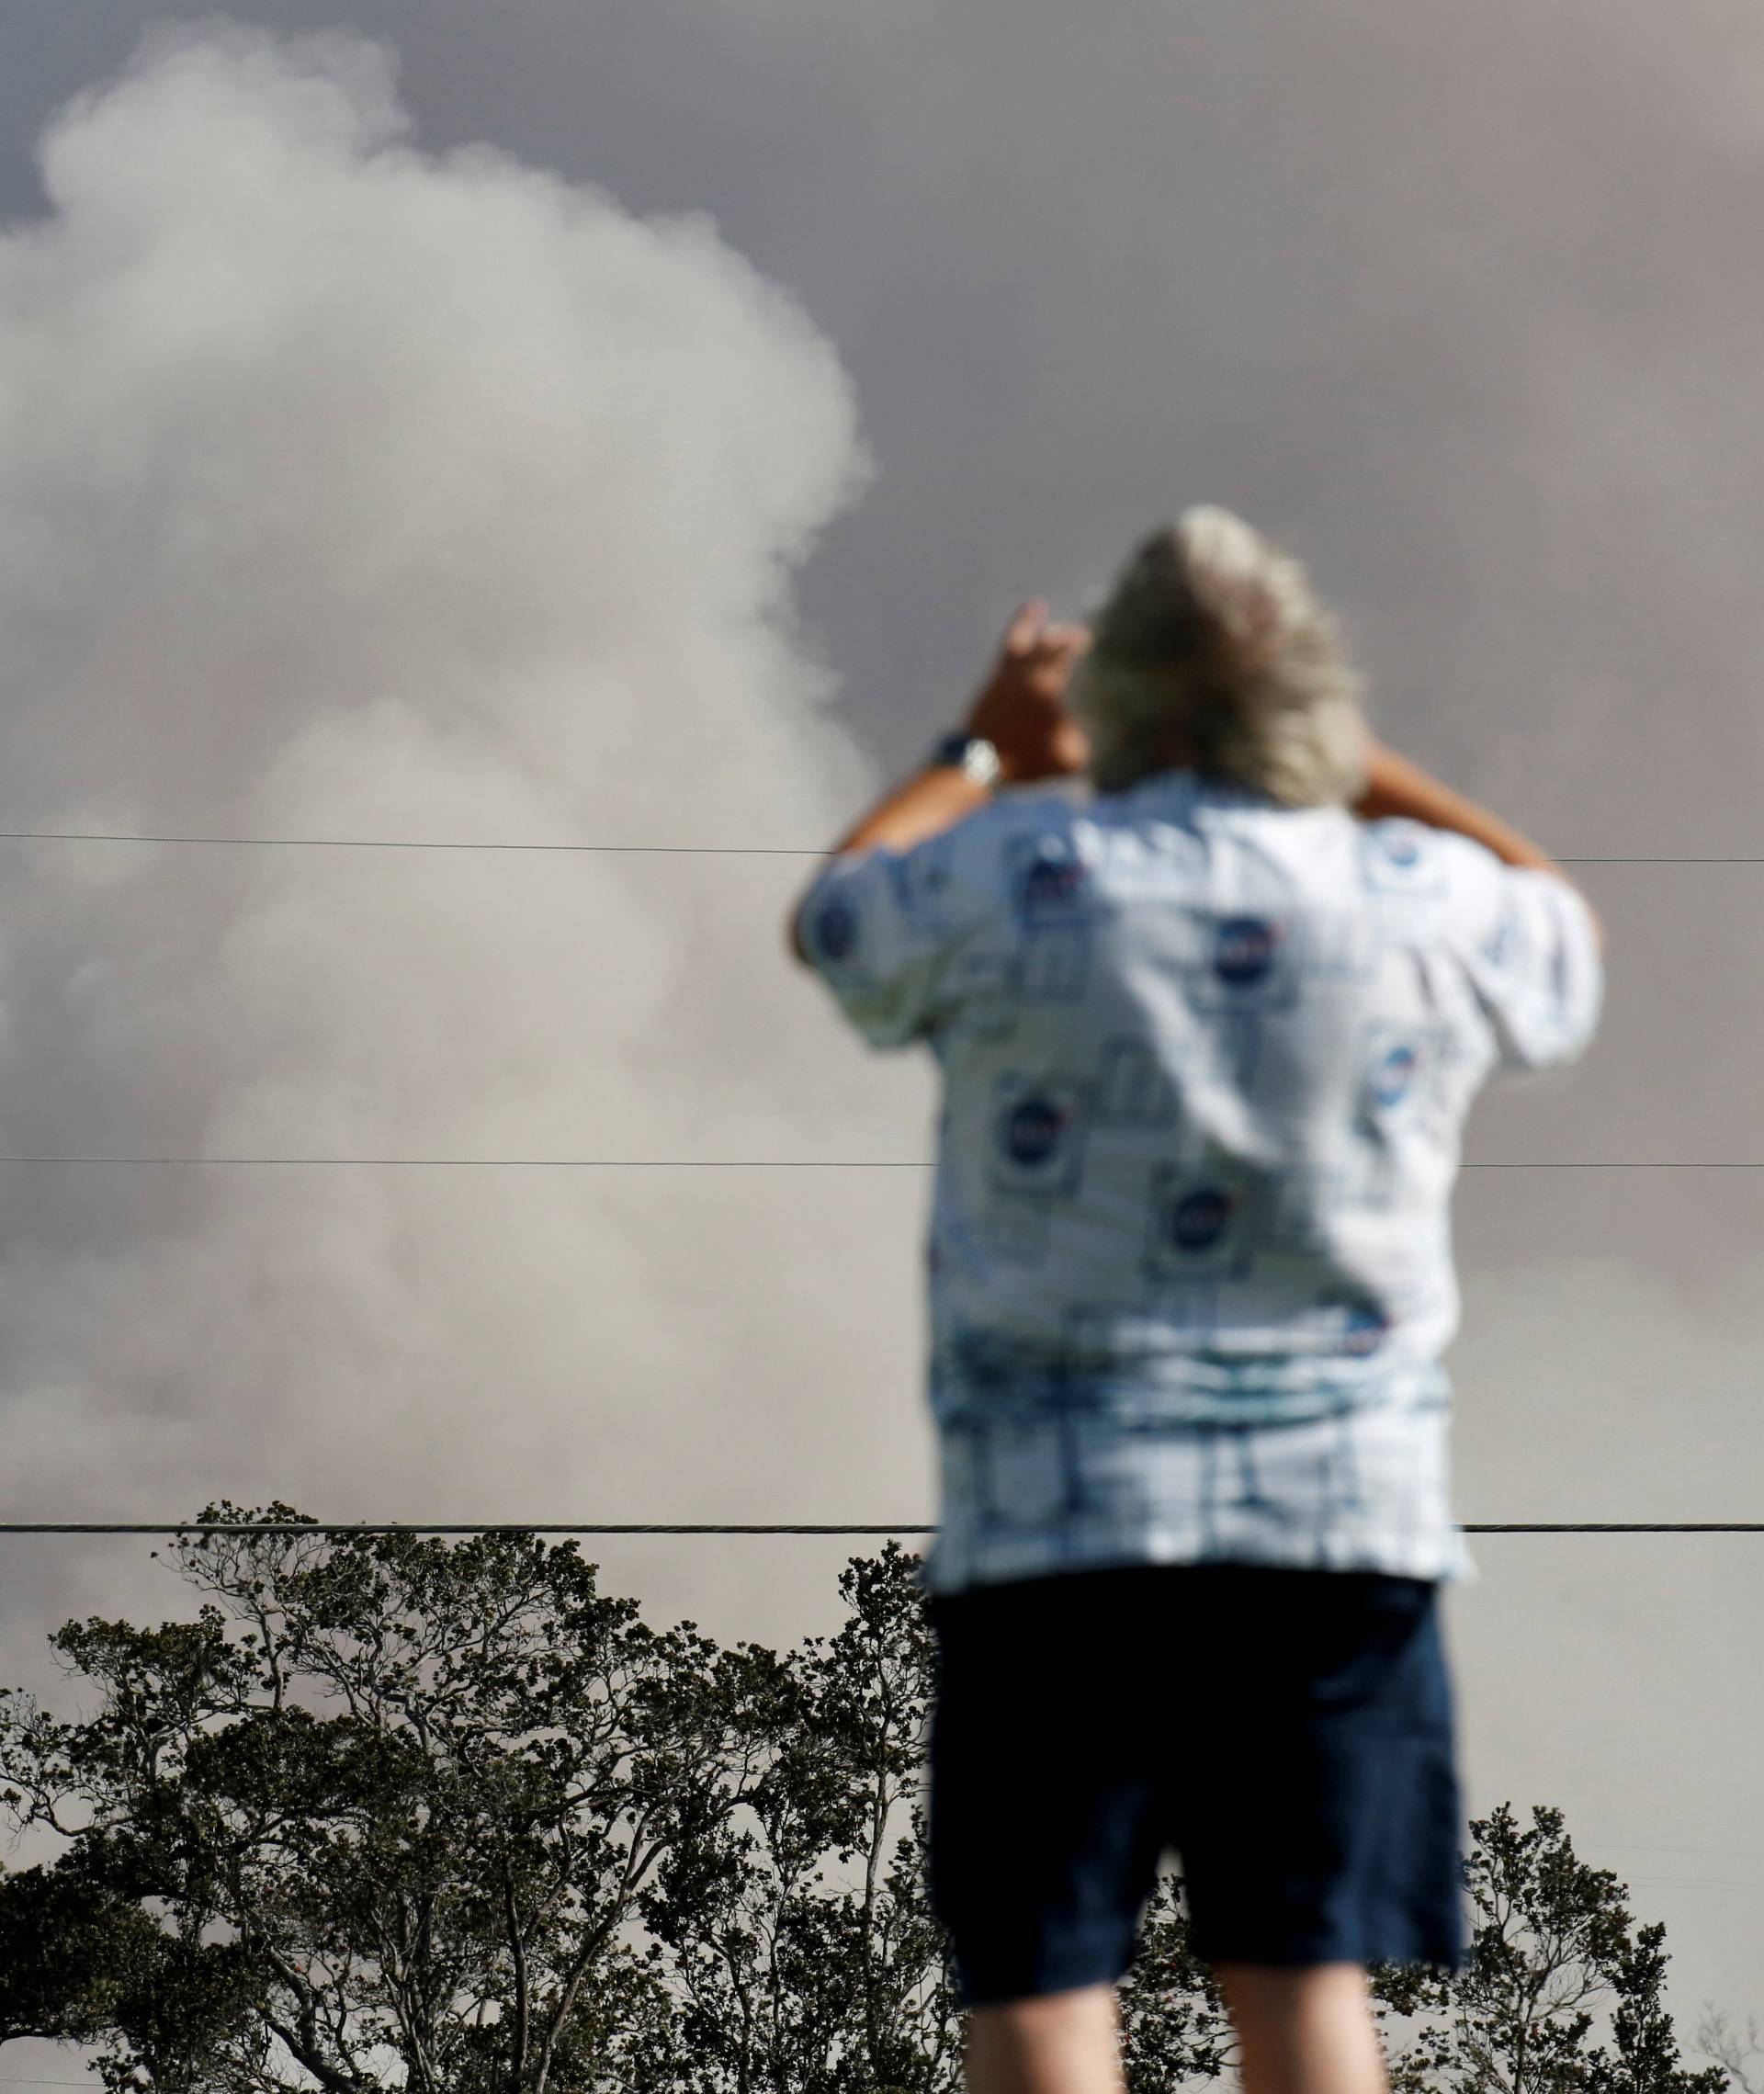 A man takes a photo as ash erupts from the Halemaumau Crater near the community of Volcano